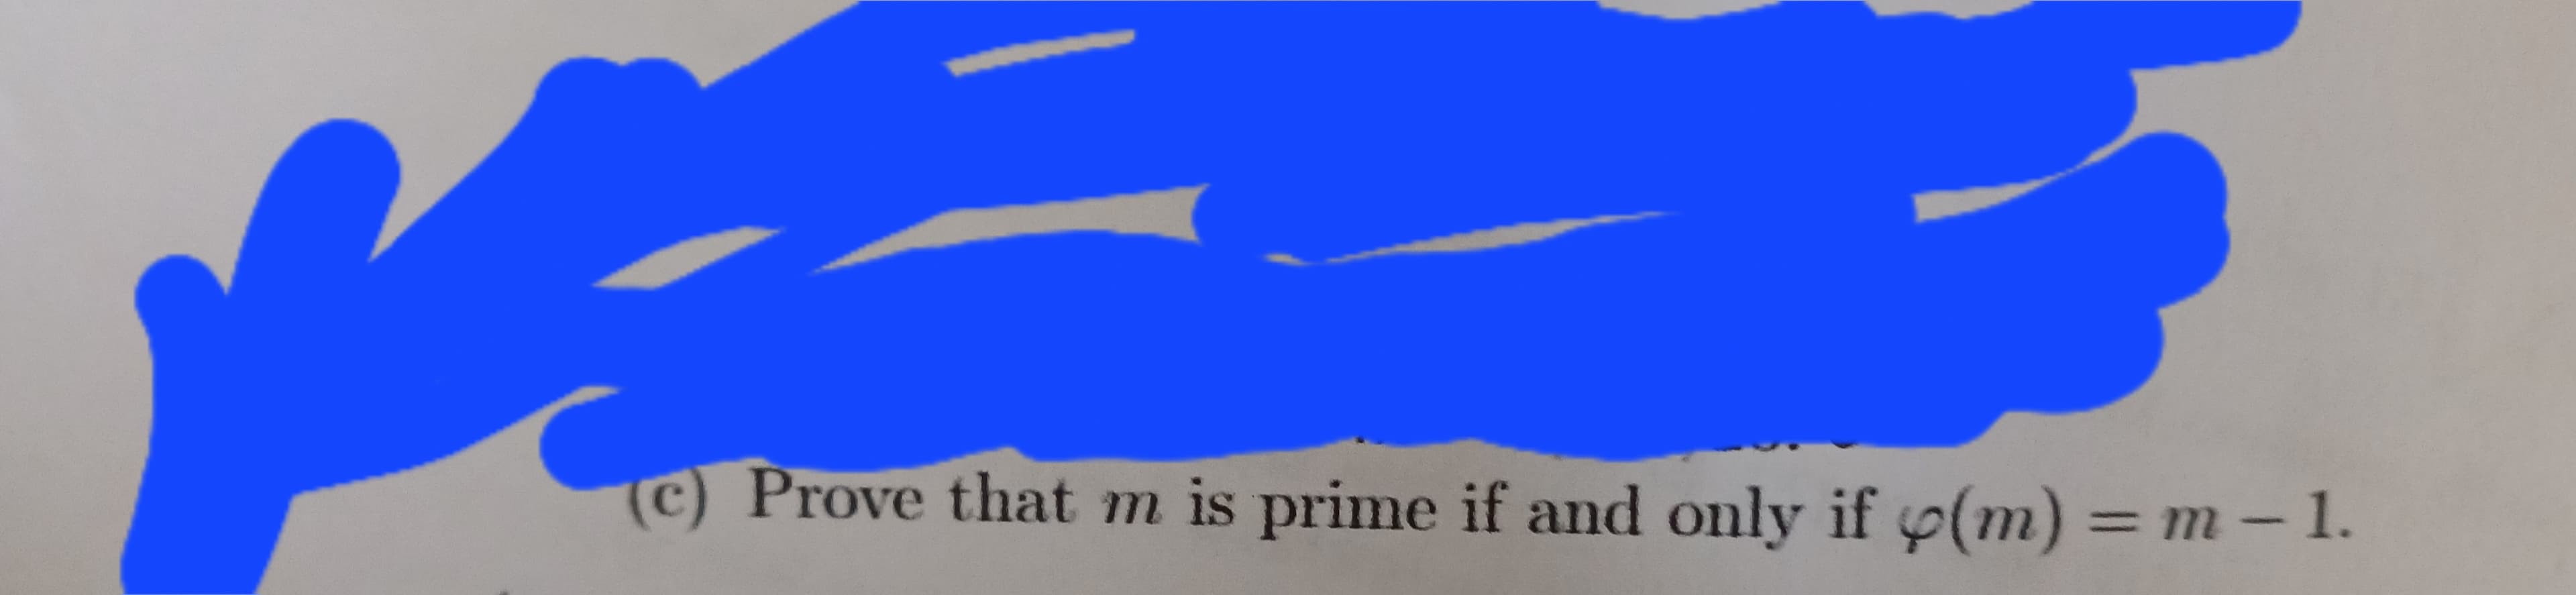 (c) Prove that m is prime if and only if y(m) = m - 1.